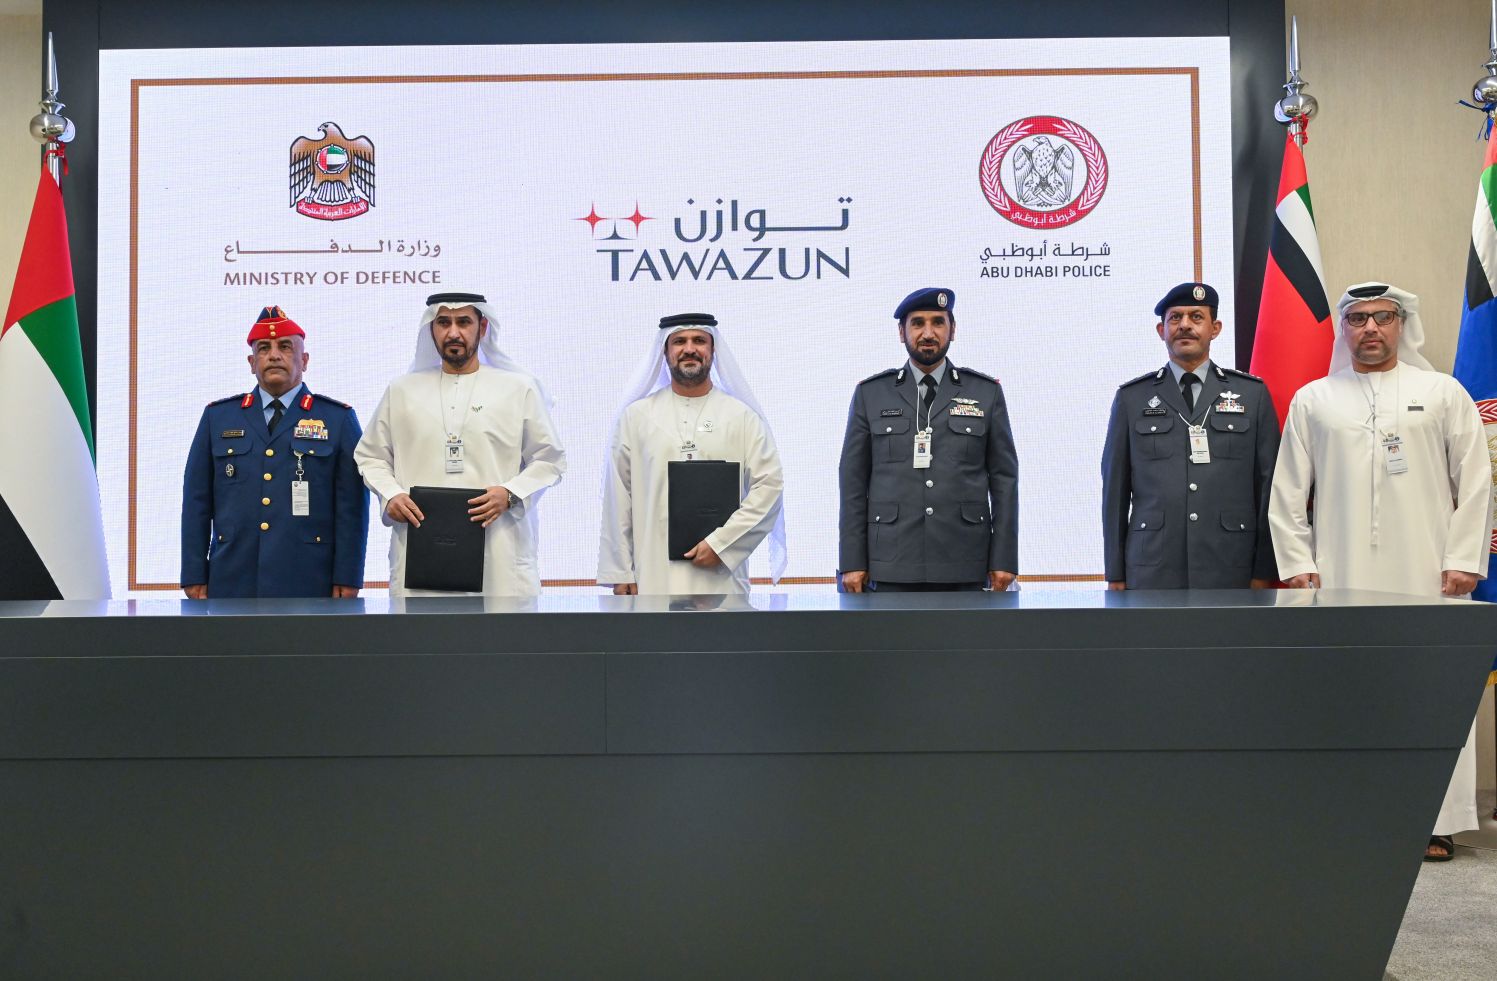 His Highness Sheikh Mohamed bin Zayed Al Nahyan issues resolutions appointing Tawazun to manage procurements, contracts of UAE Armed Forces, Abu Dhabi Police